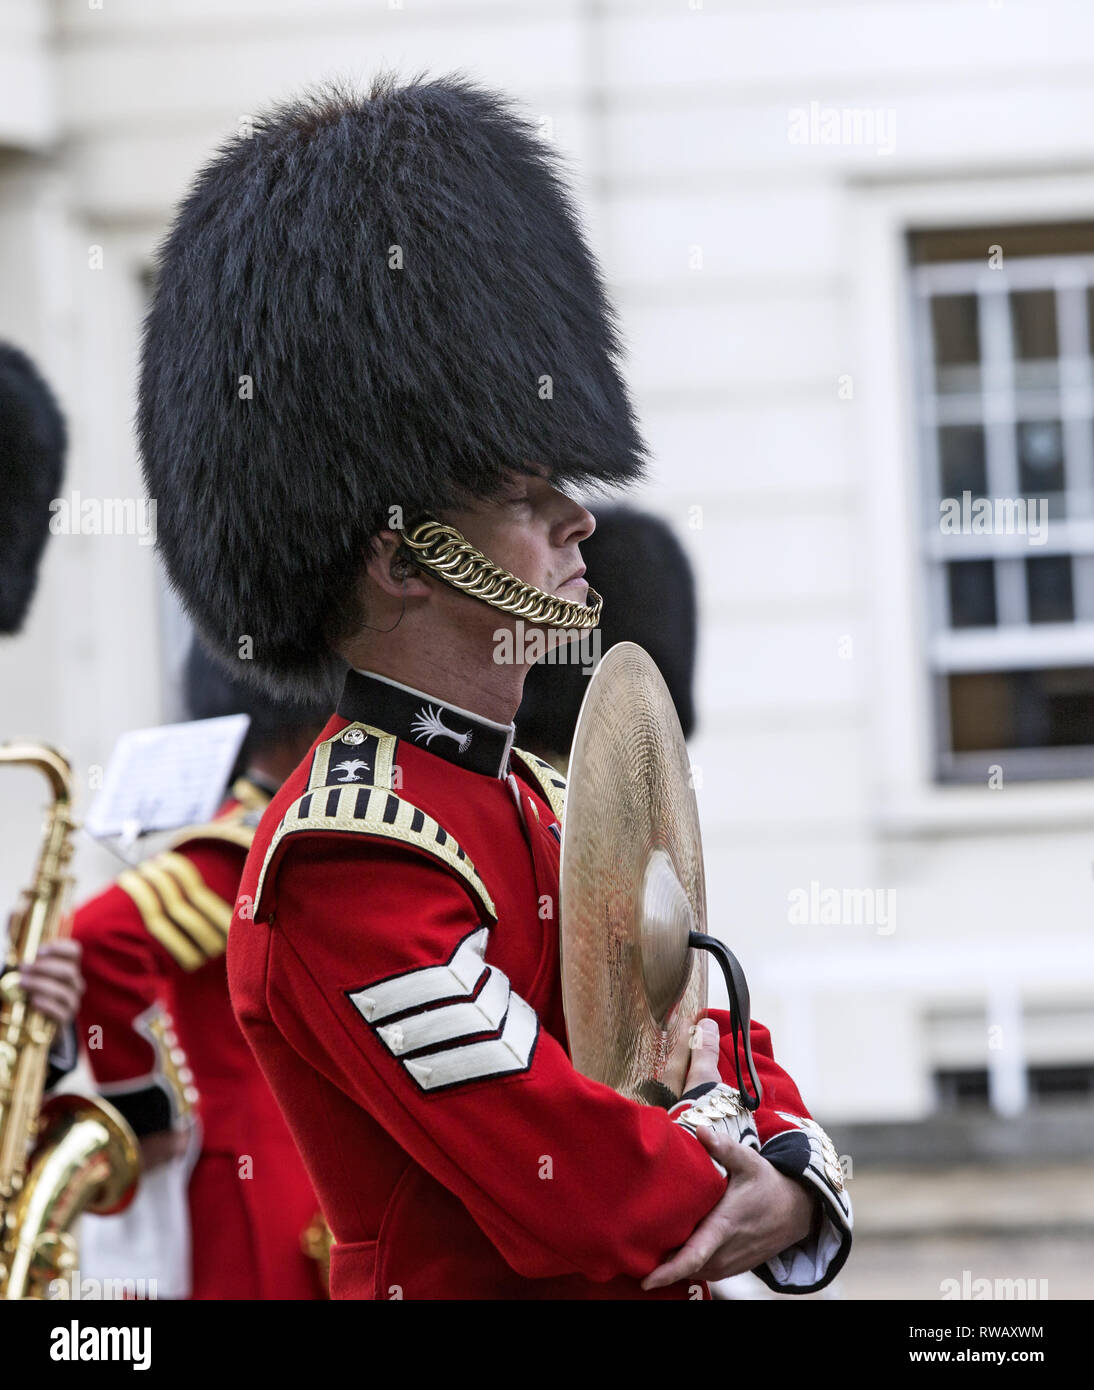 Member of the Band of the Grenadier Guards in London with closed eyes getting ready to play. Wearing bearskin and holding cymbal. Stock Photo